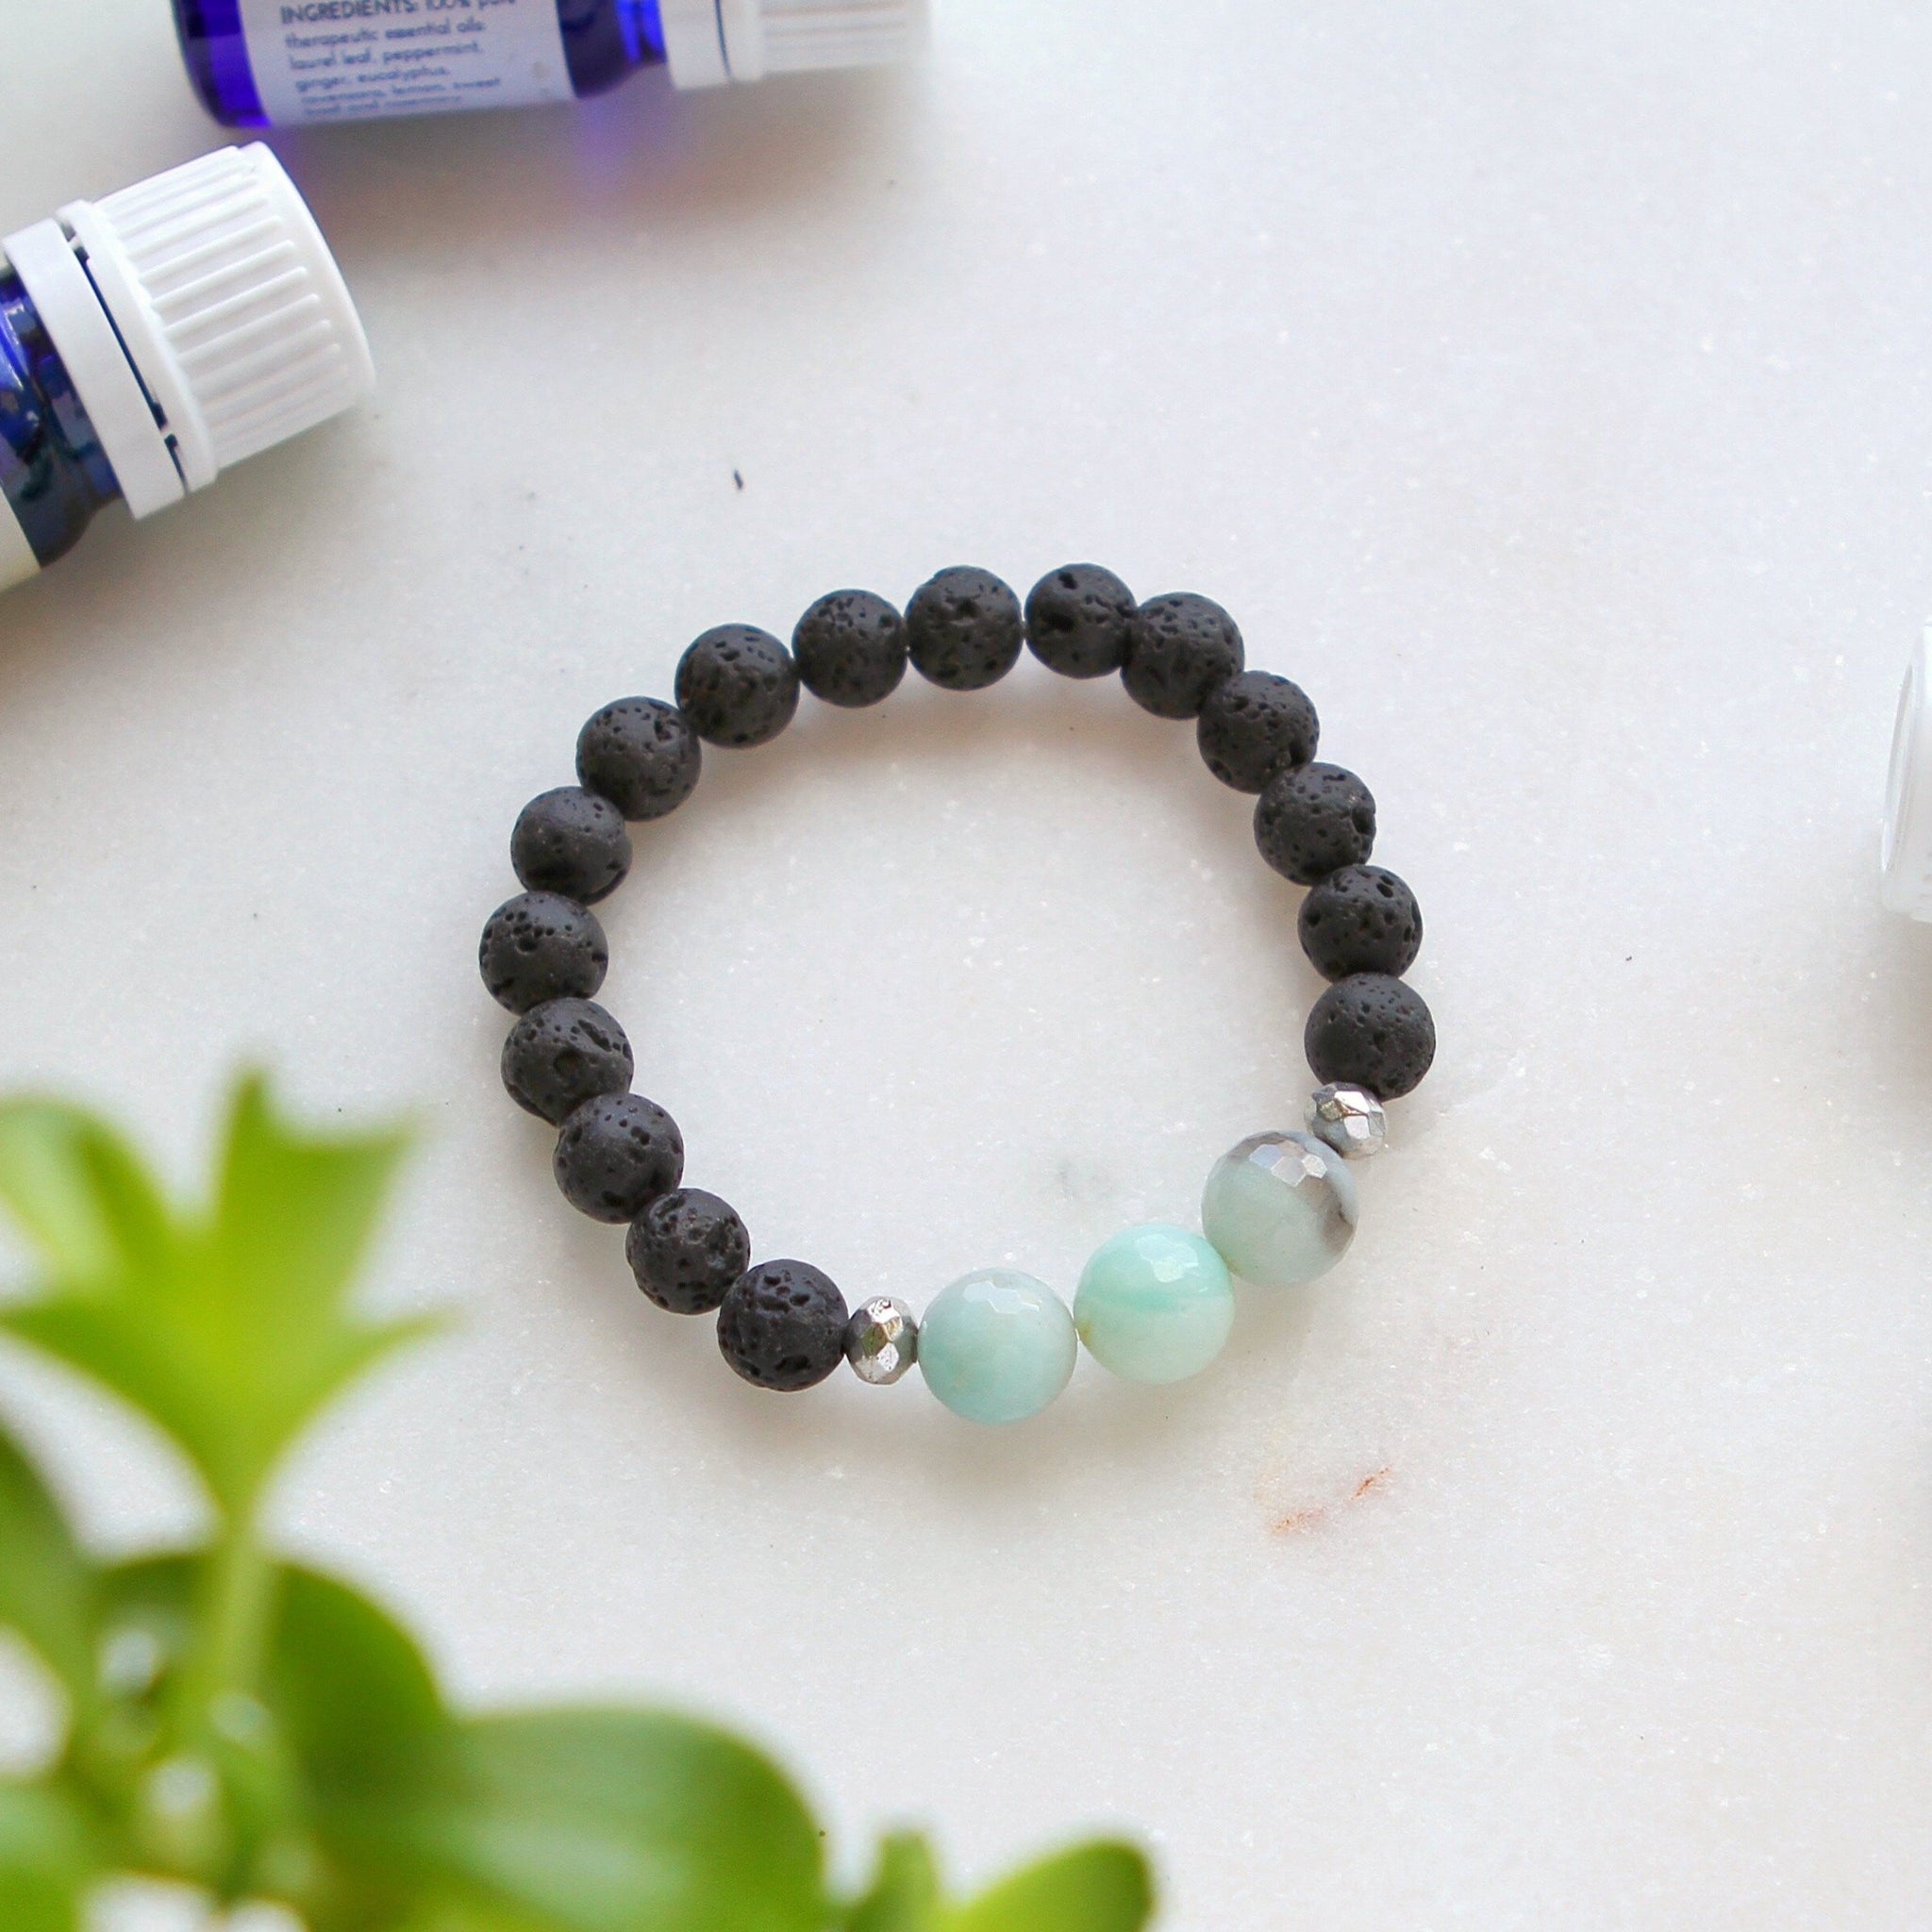 Wild Essentials Turquoise and Hematite Lava Stone Essential Oil Diffuser  Bracelet, Adjustable, Aromatherapy Jewelry Gift Set and 100% Pure Oils  (Lavender, Peppermint, Inner Calm and Zen) : Amazon.in